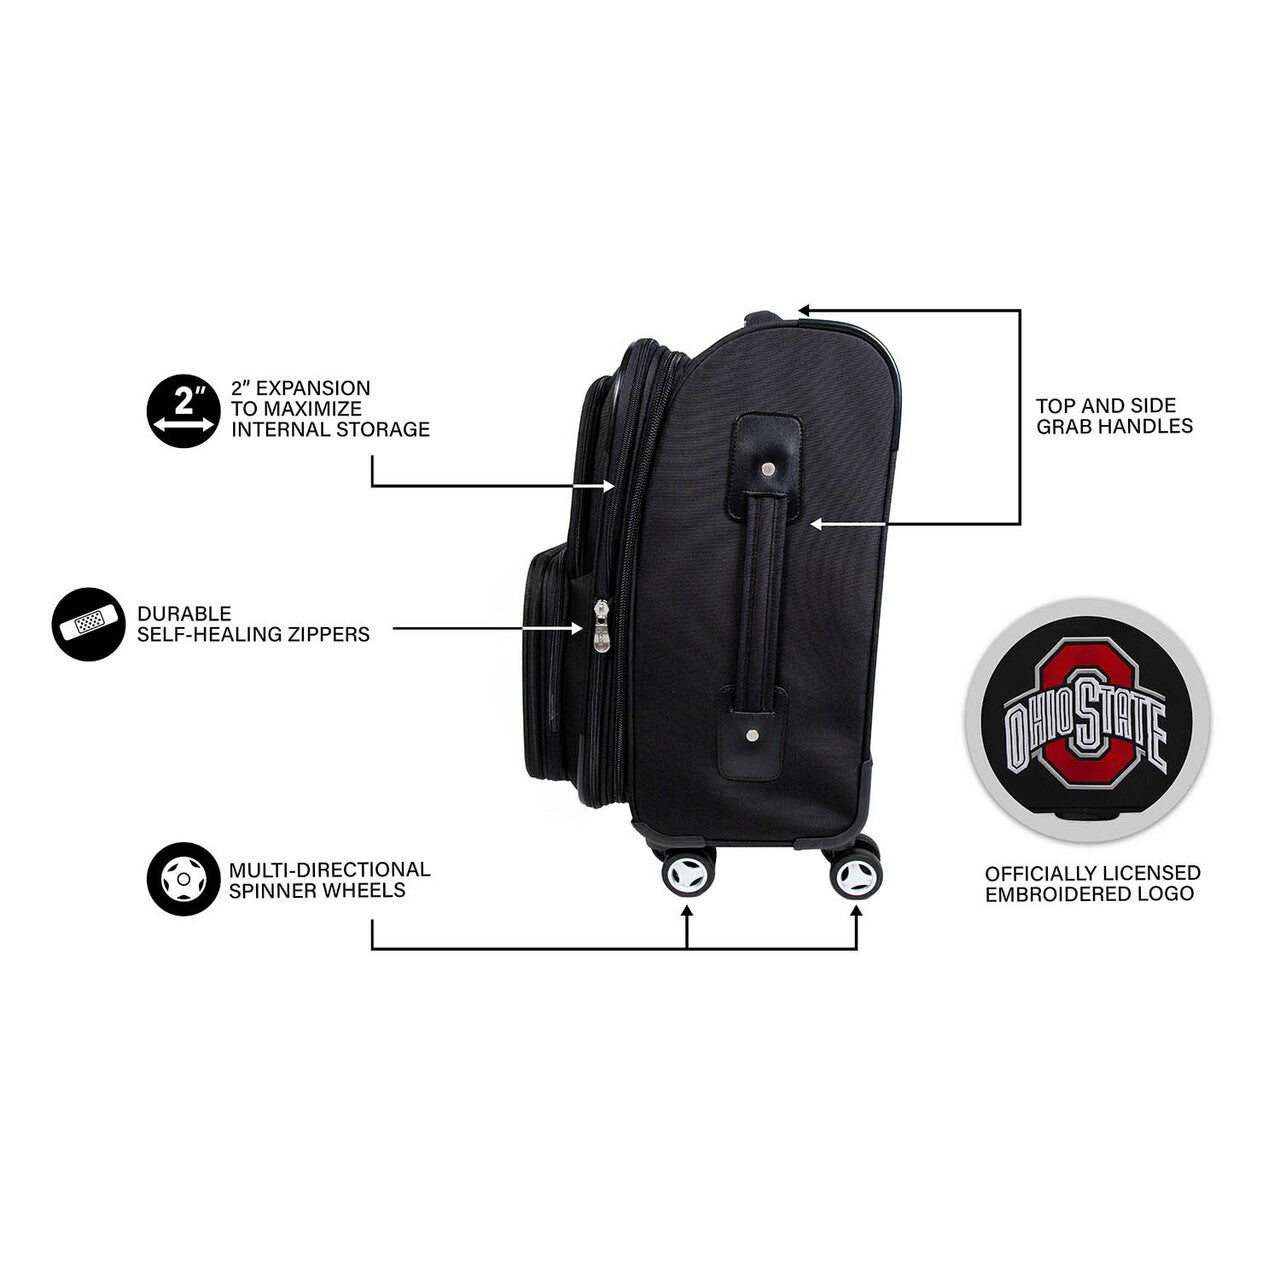 Washington Wizards 21" Carry-on Spinner Luggage